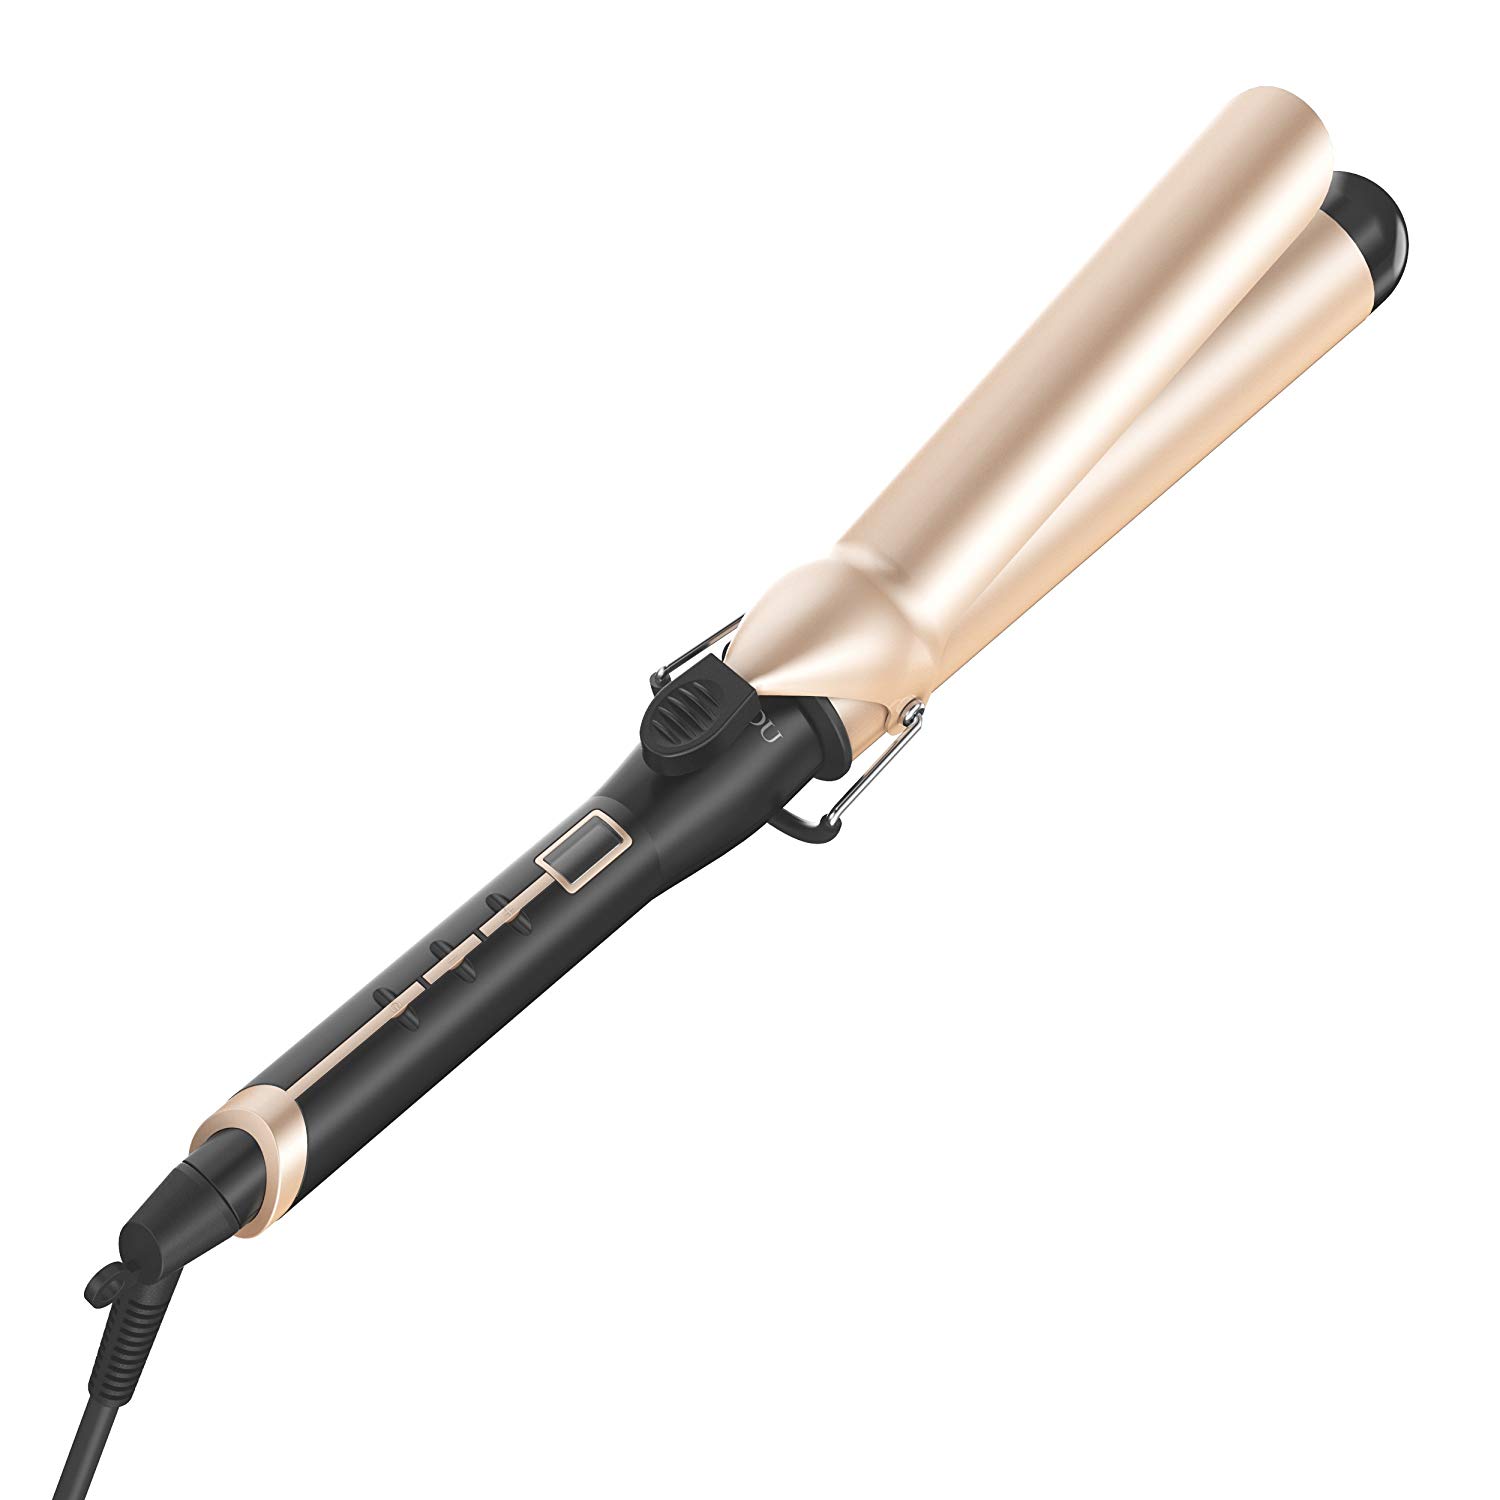 Anjou Curling Iron 1.5 inch with Tourmaline Ceramic Coating, Hair Curling Wand 1 1-2 inch with Anti-scalding Insulated Tip, Hair Salon Curler Waver Maker